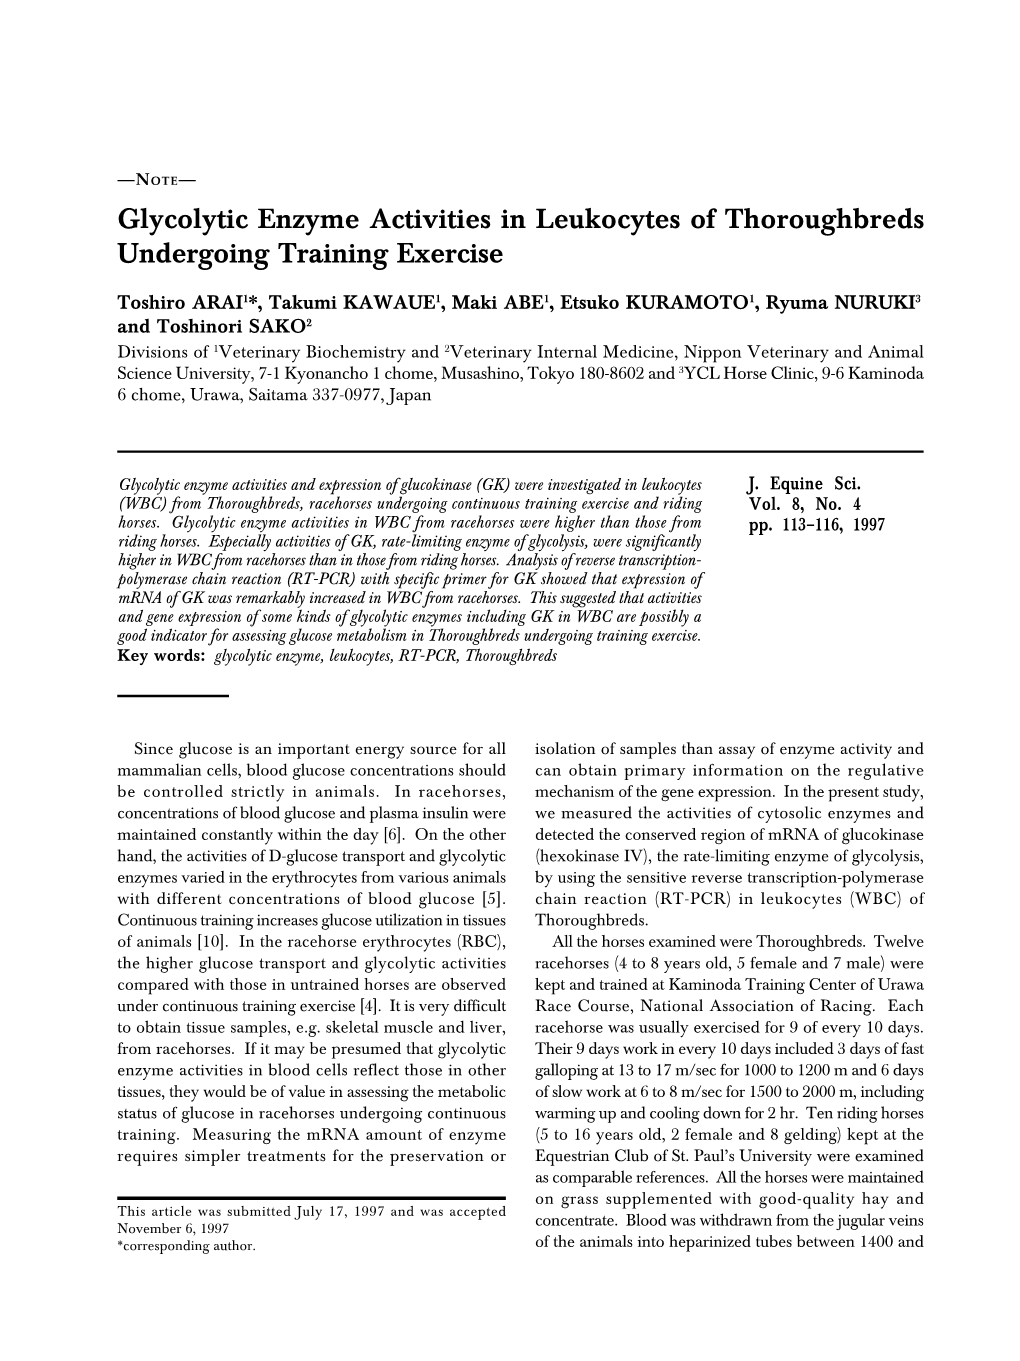 Glycolytic Enzyme Activities in Leukocytes of Thoroughbreds Undergoing Training Exercise